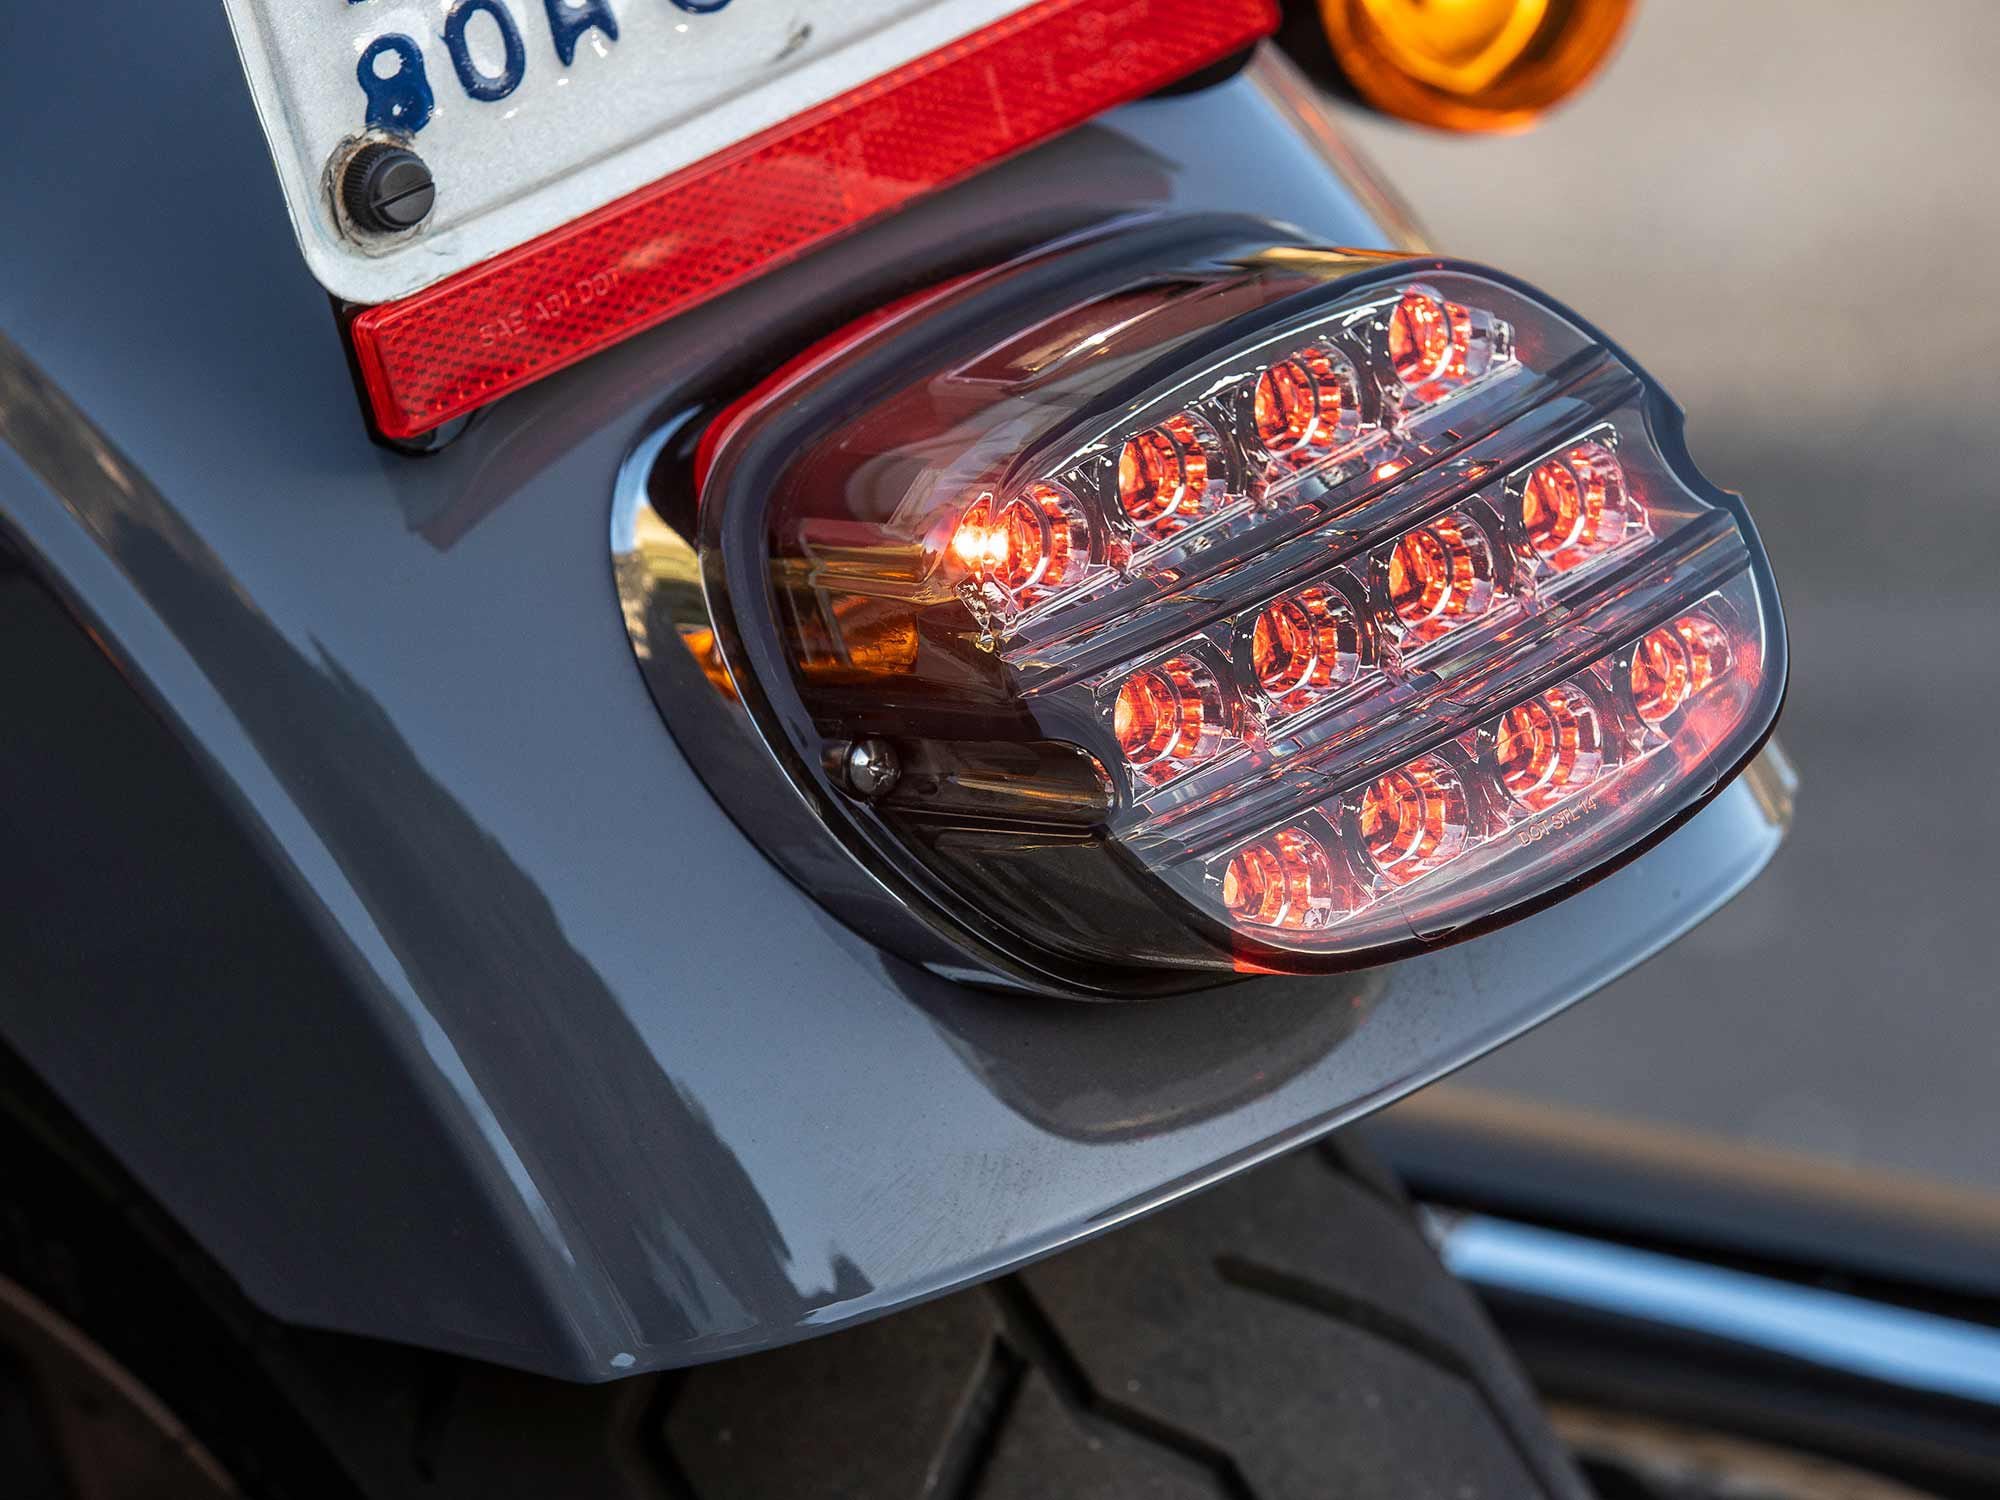 The Zeppelin taillight is now LED. So yes…it’s an LED Zeppelin.